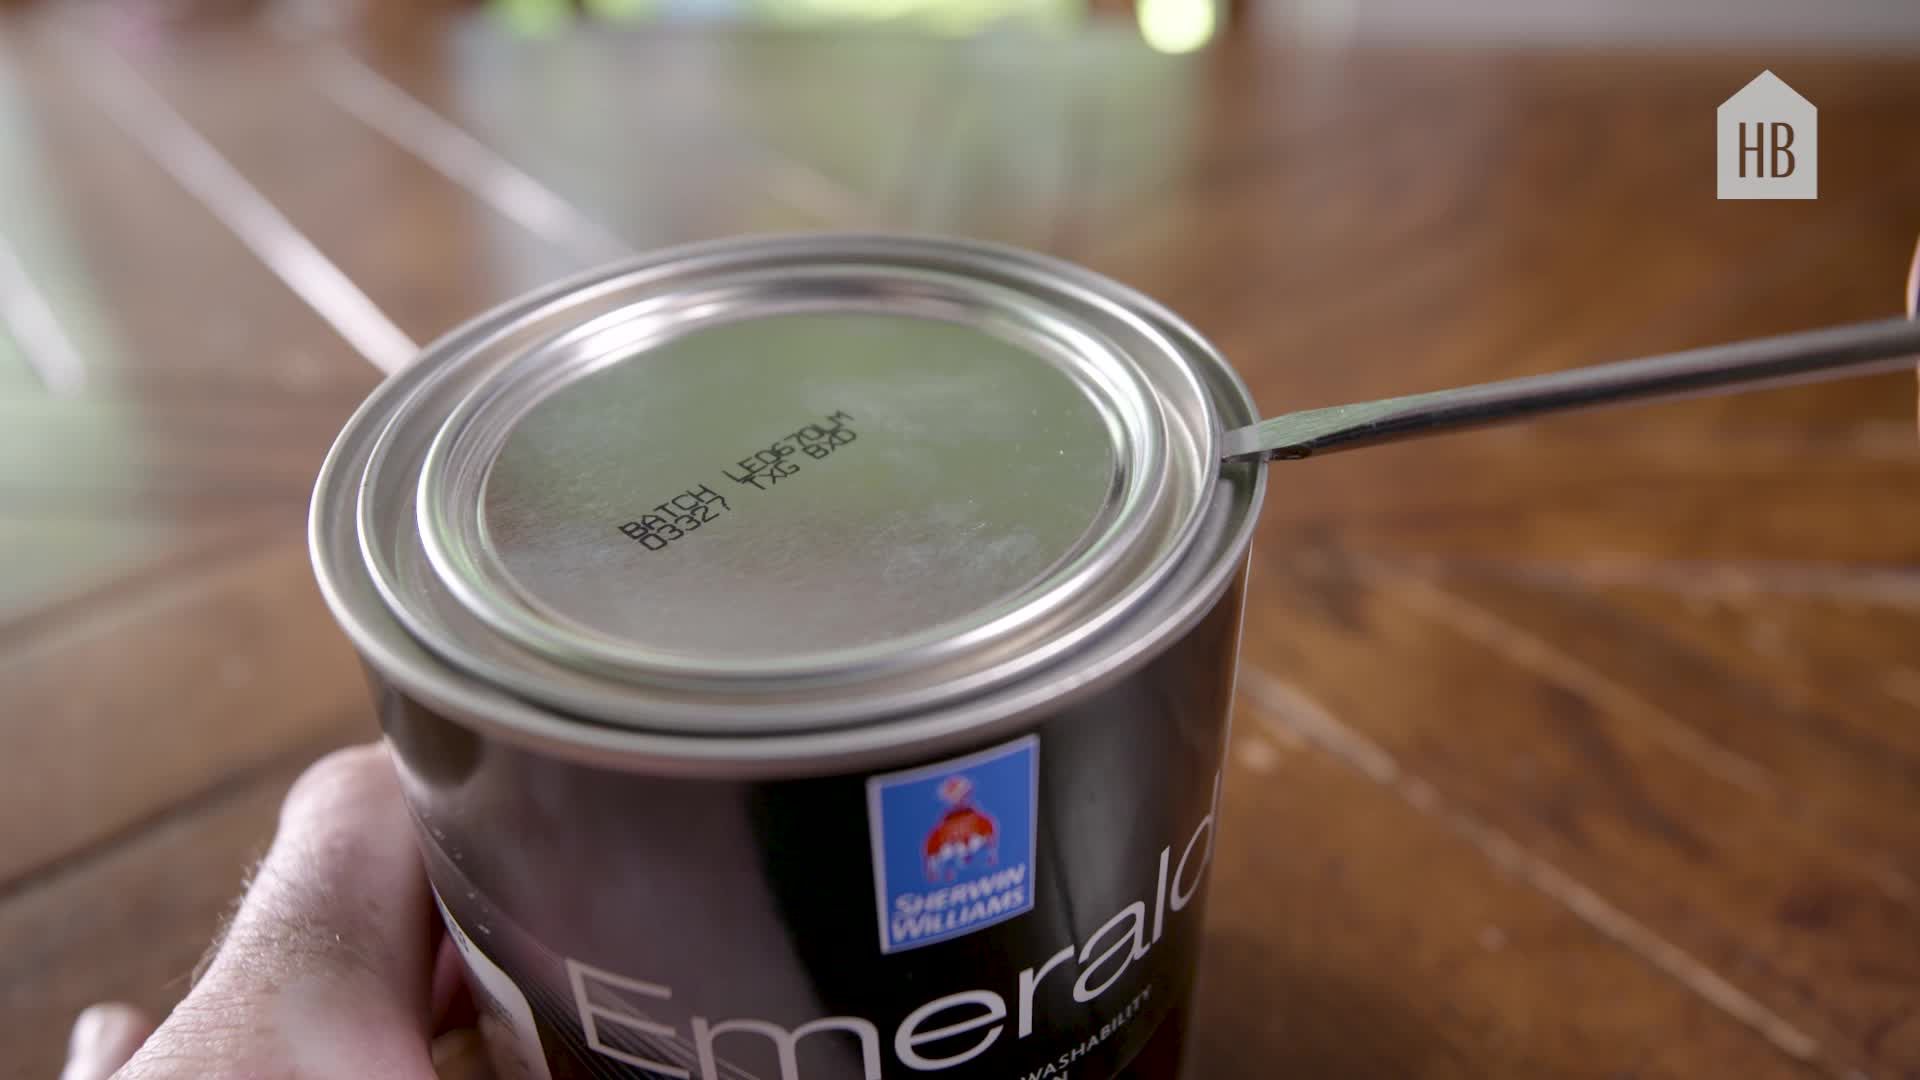 How to Open a Paint Can Without Making a Huge Mess